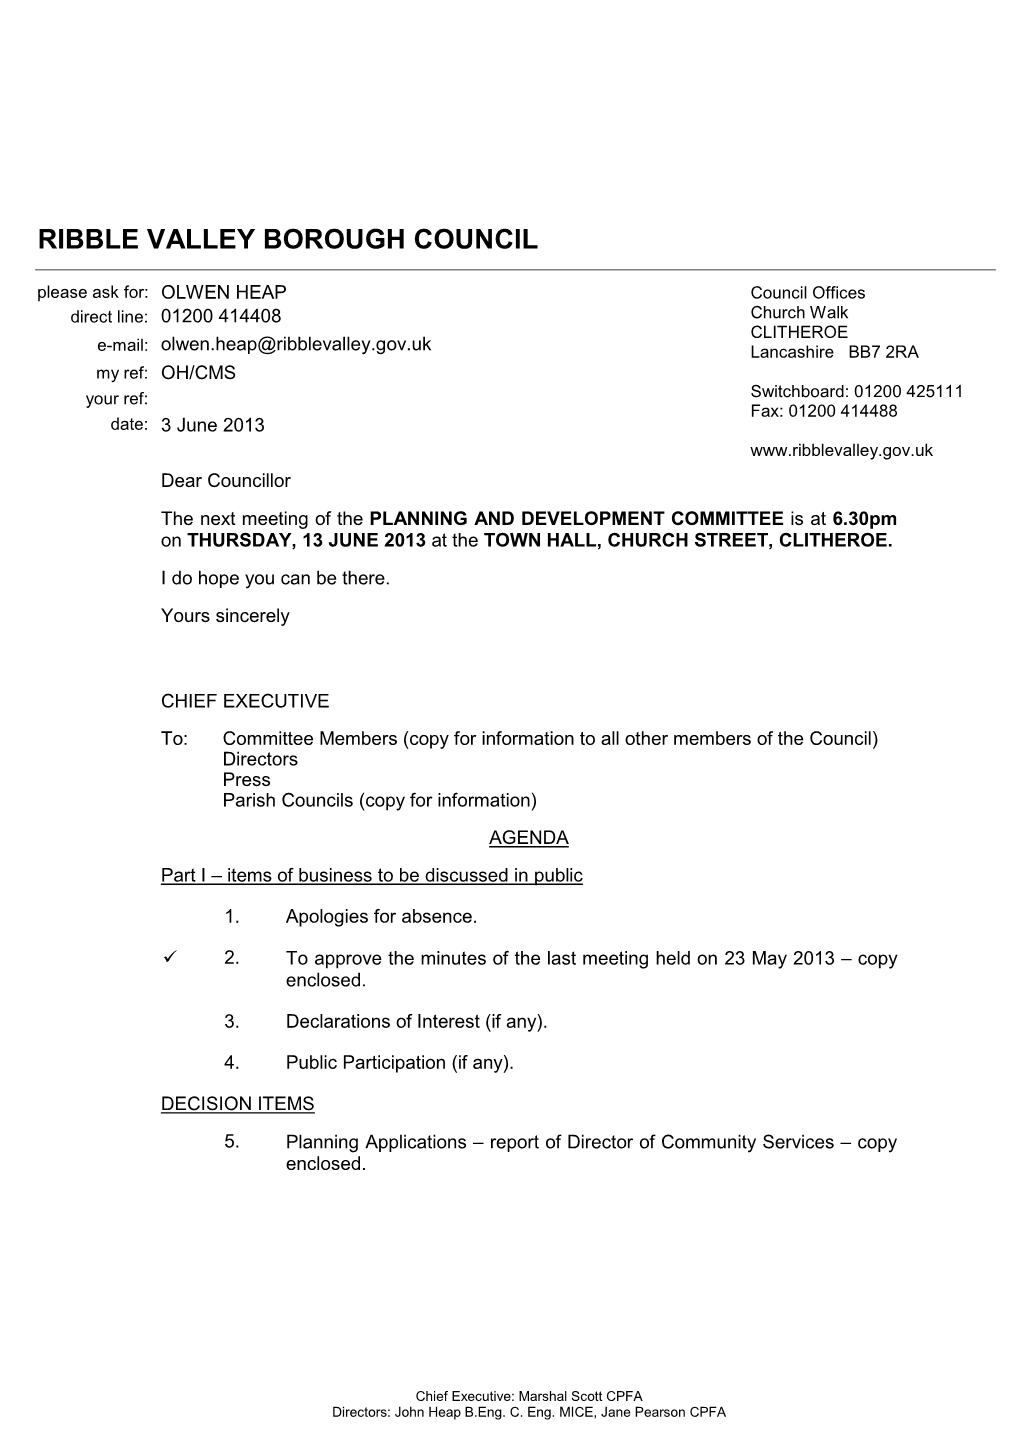 PLANNING and DEVELOPMENT COMMITTEE Is at 6.30Pm on THURSDAY, 13 JUNE 2013 at the TOWN HALL, CHURCH STREET, CLITHEROE